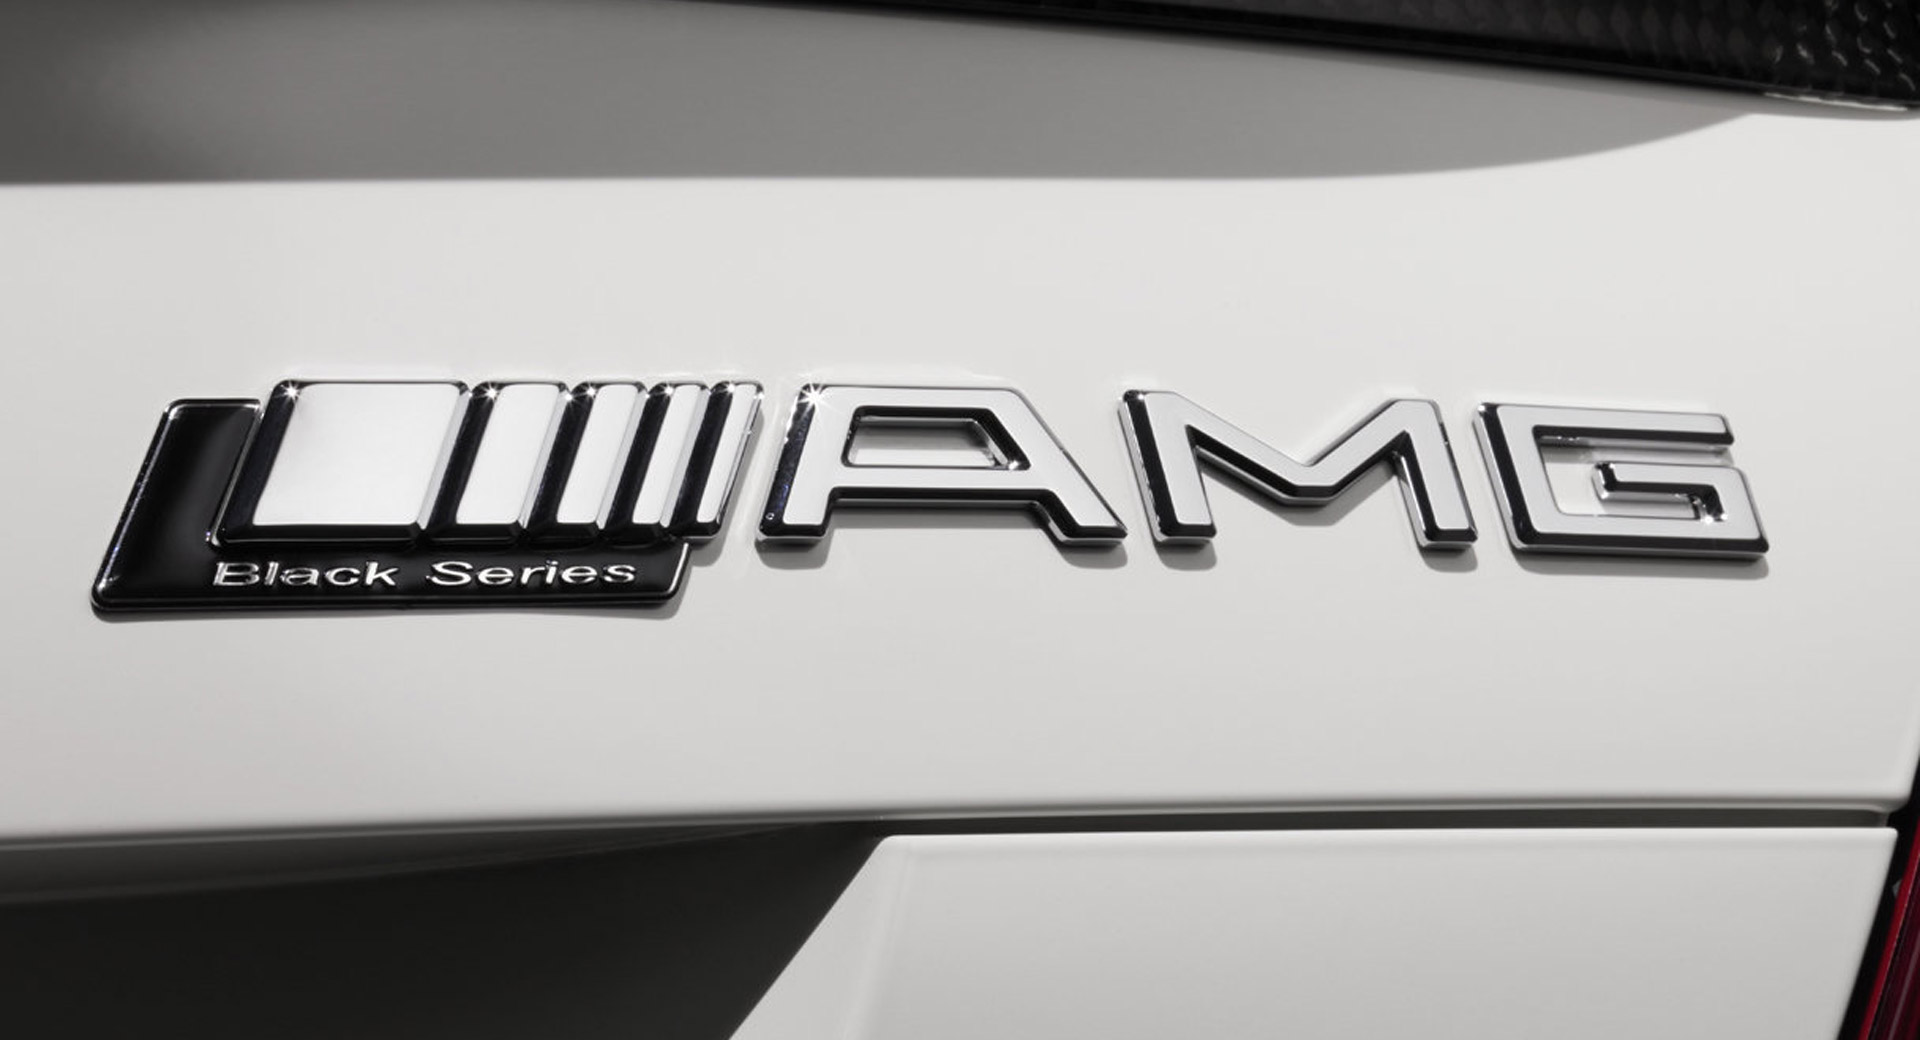 Mercedes-AMG Says It'll Never Do A Black Series SUV | Carscoops